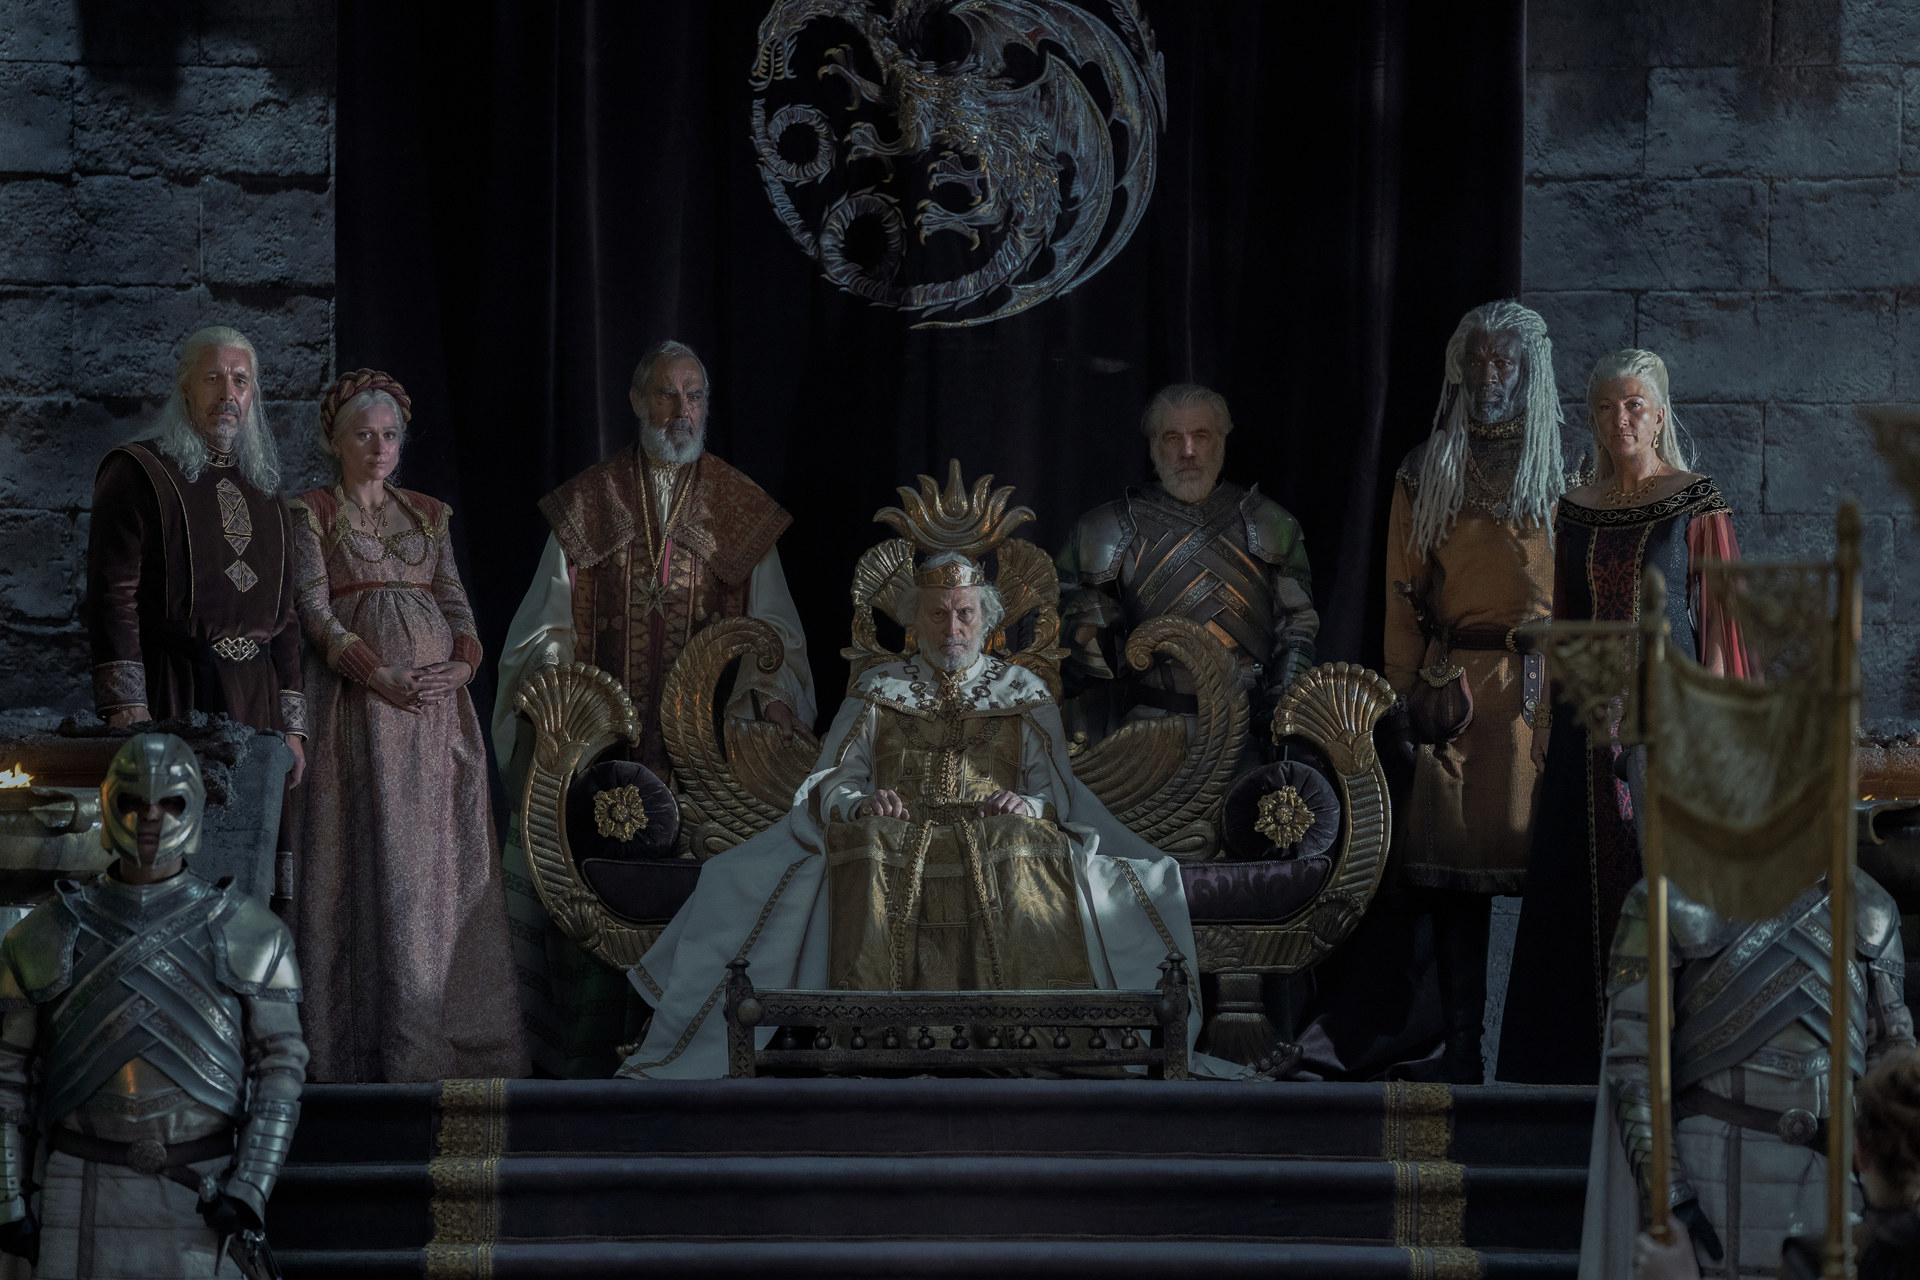 Jaeherys sits on a golden throne flanked by Viserys, Aemma, Corlys, and Rhaenys.